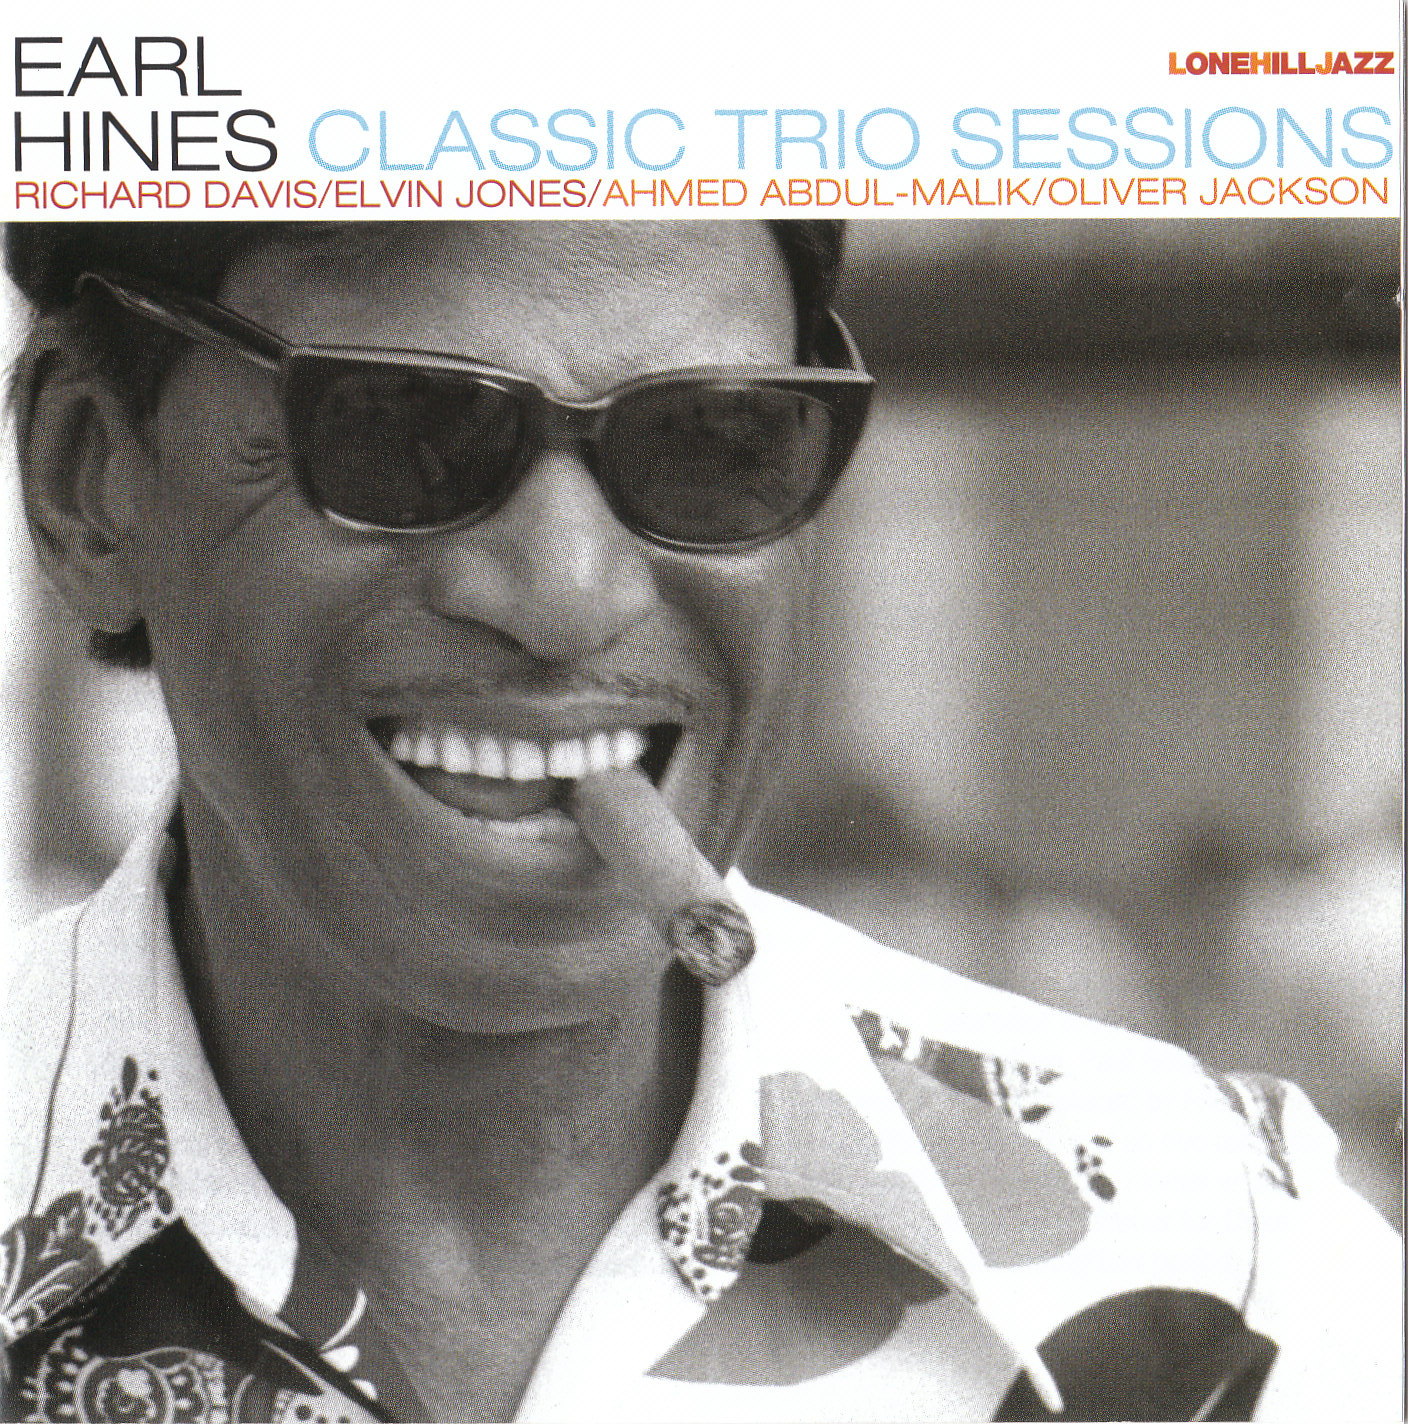 EARL HINES - Classic Trio Sessions cover 